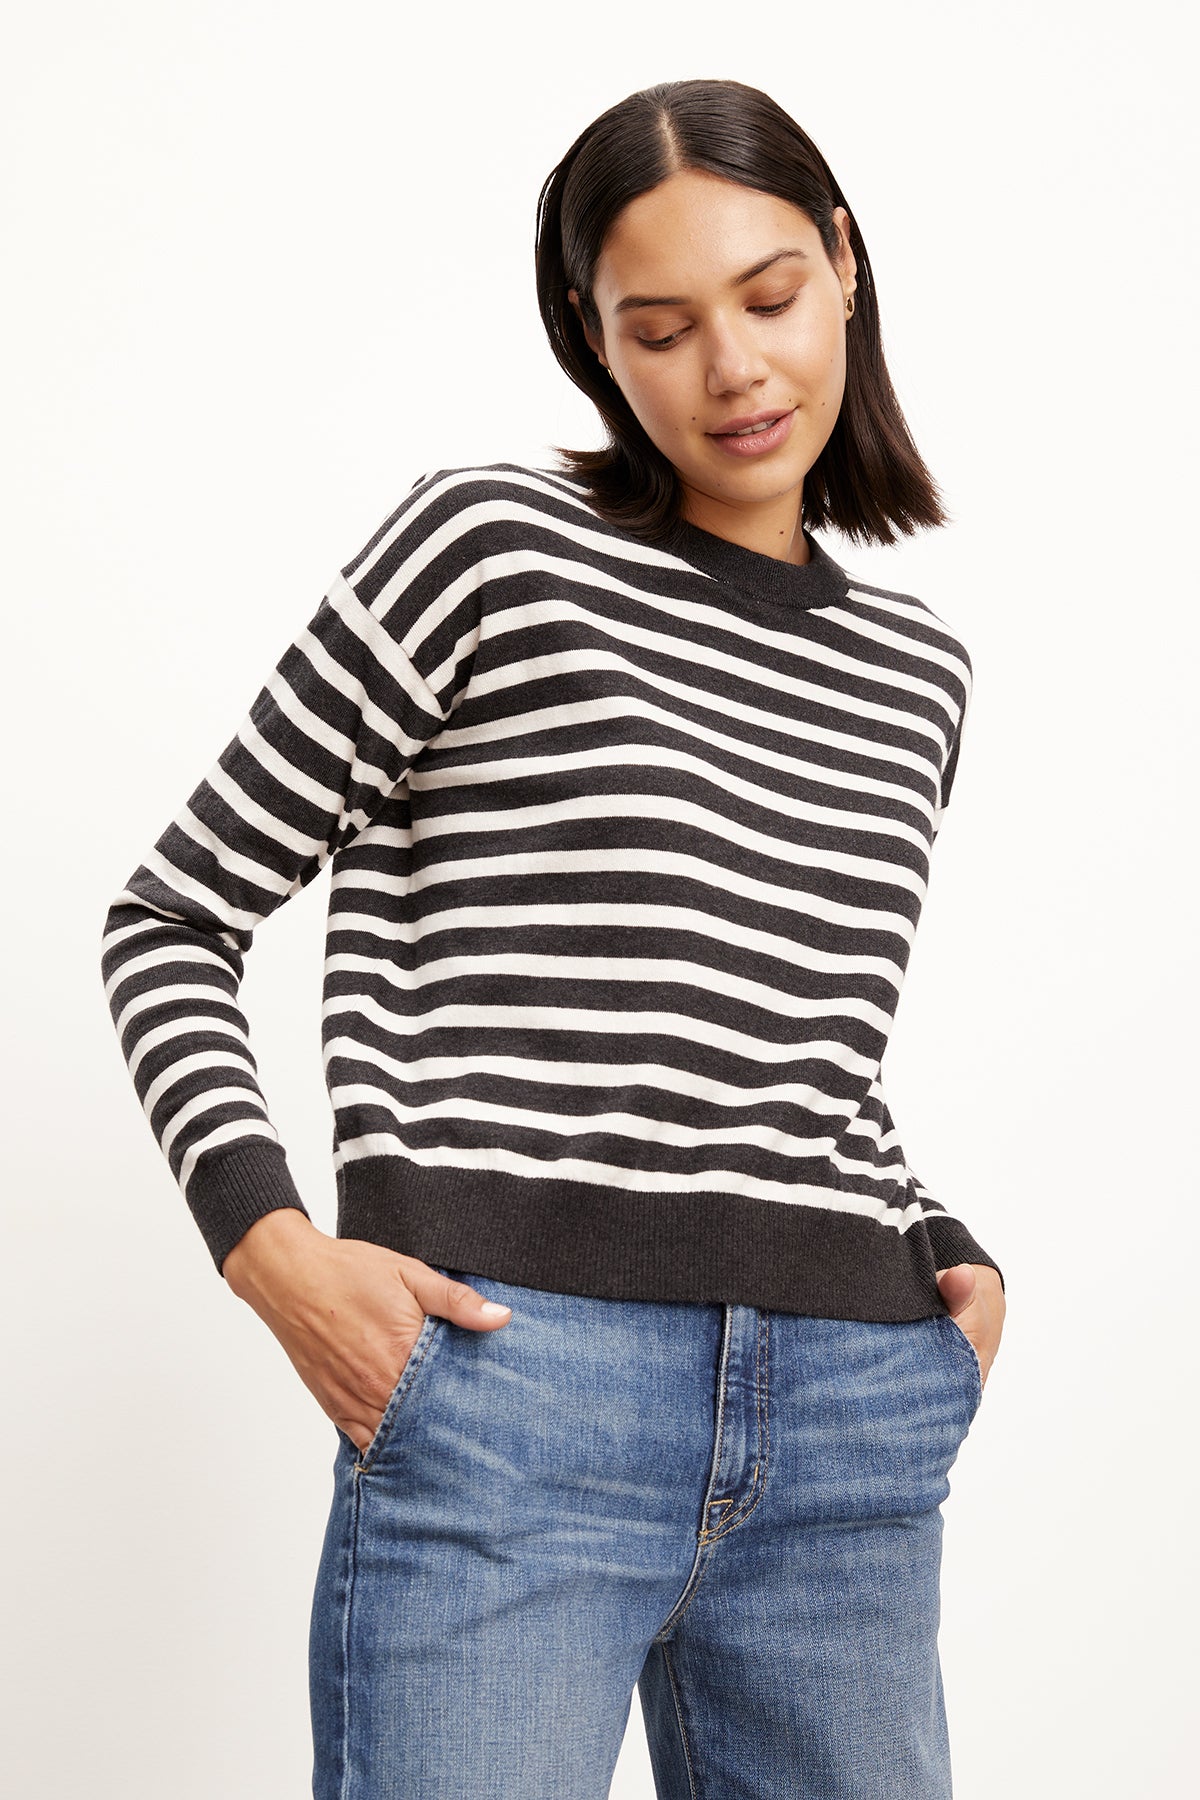 A model wearing the Velvet by Graham & Spencer ALISTER STRIPED CREW NECK SWEATER and jeans.-26799864676545